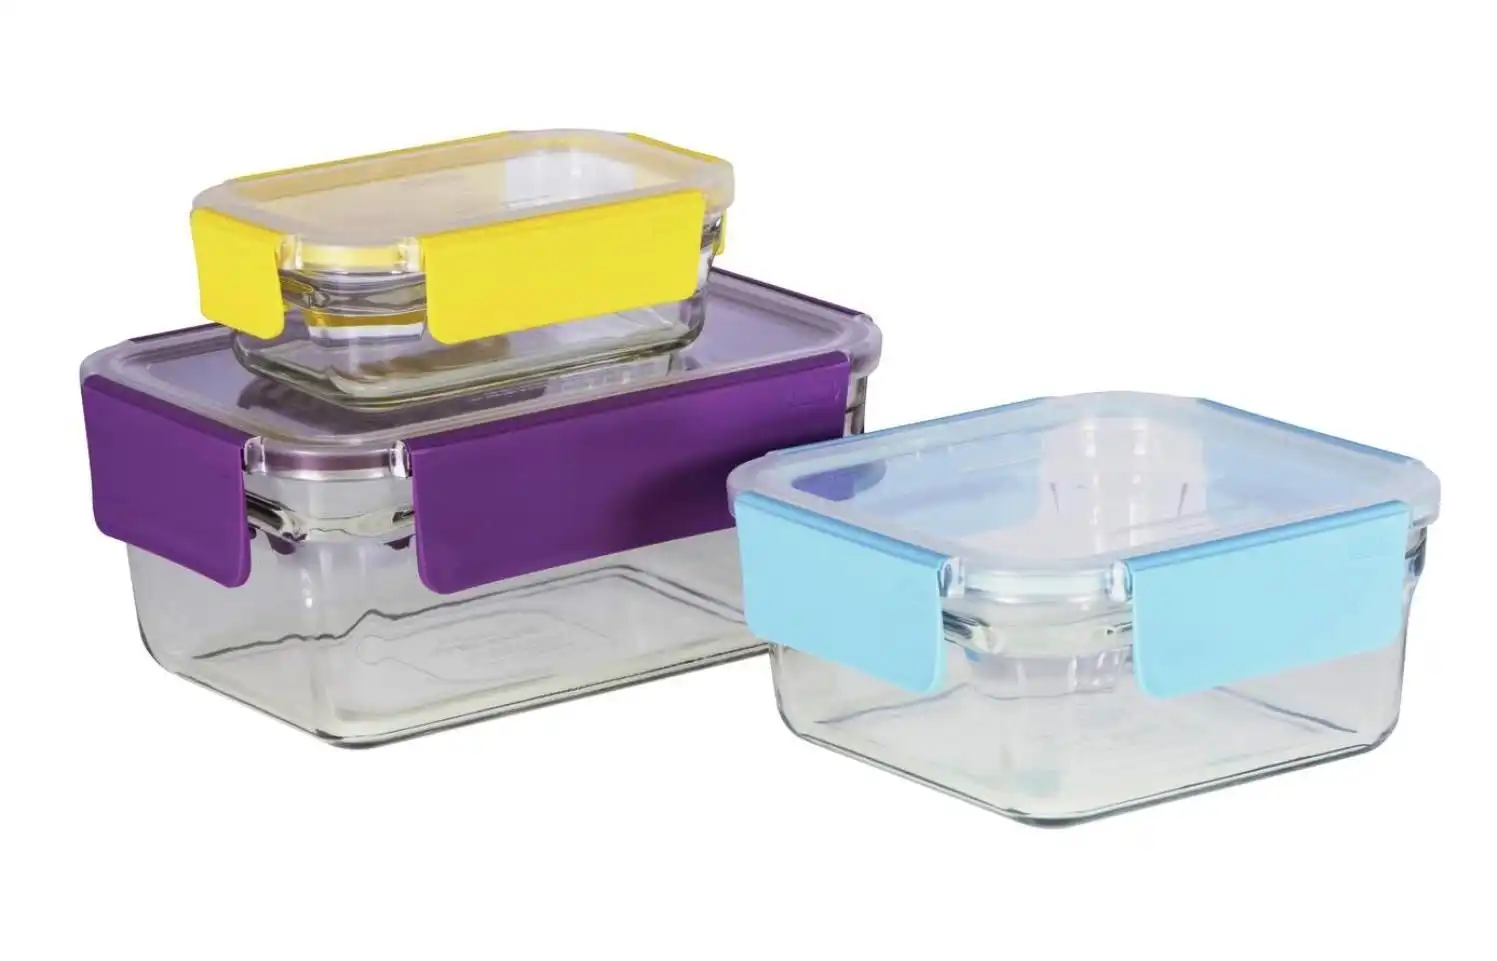 Glasslock 3 Piece Tempered Glass Food Container Premium Oven Safe Set